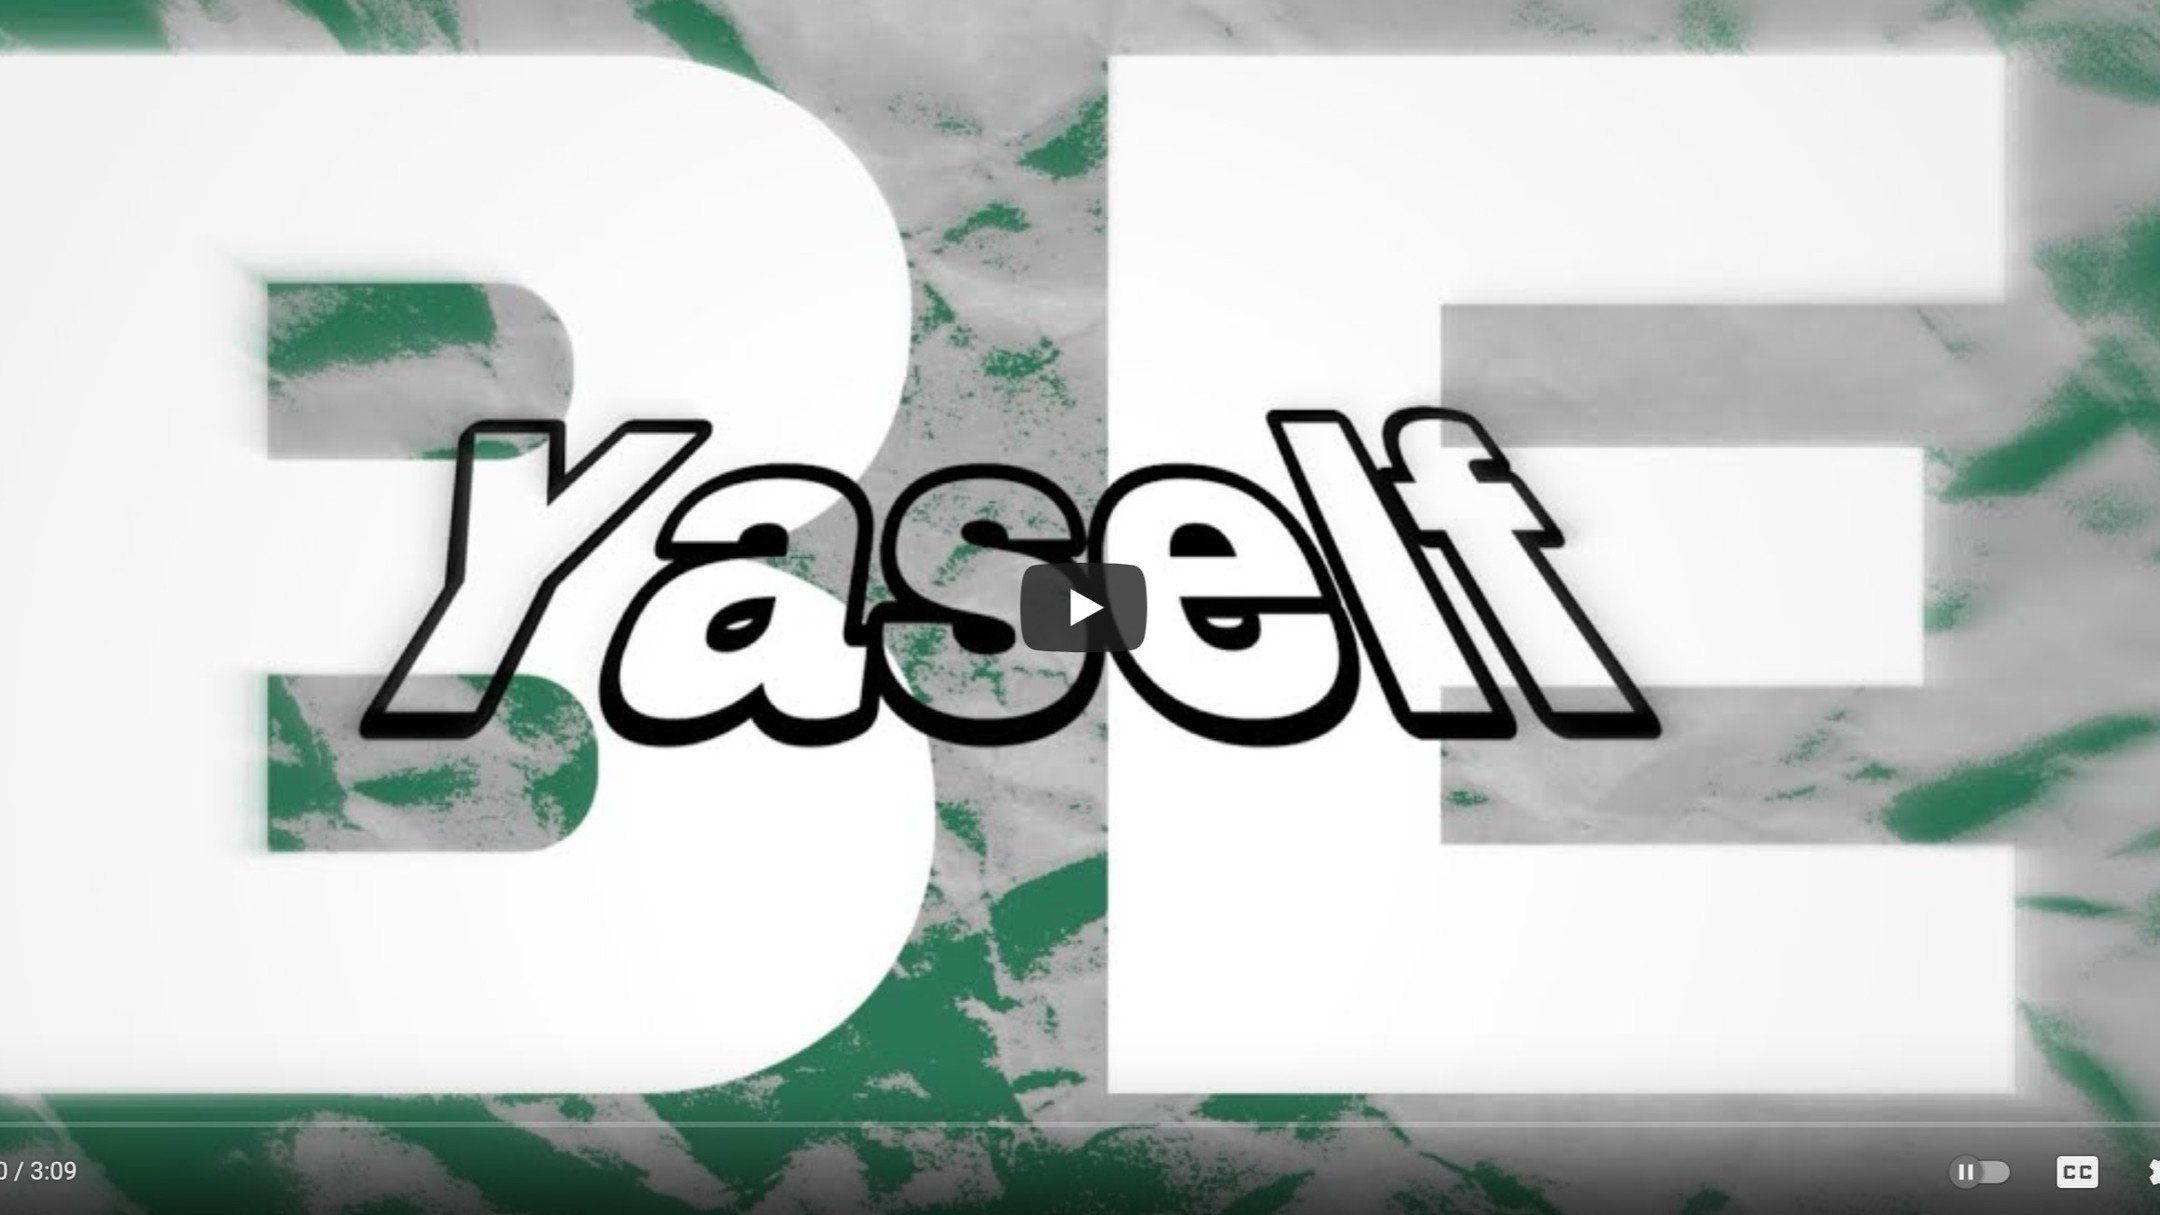 Rizz Inda Booth released the music video for his new song recorded here called &quot;Yaself&quot;. Check it out! 

https://youtu.be/FPCpcKT8Ydw?feature=shared